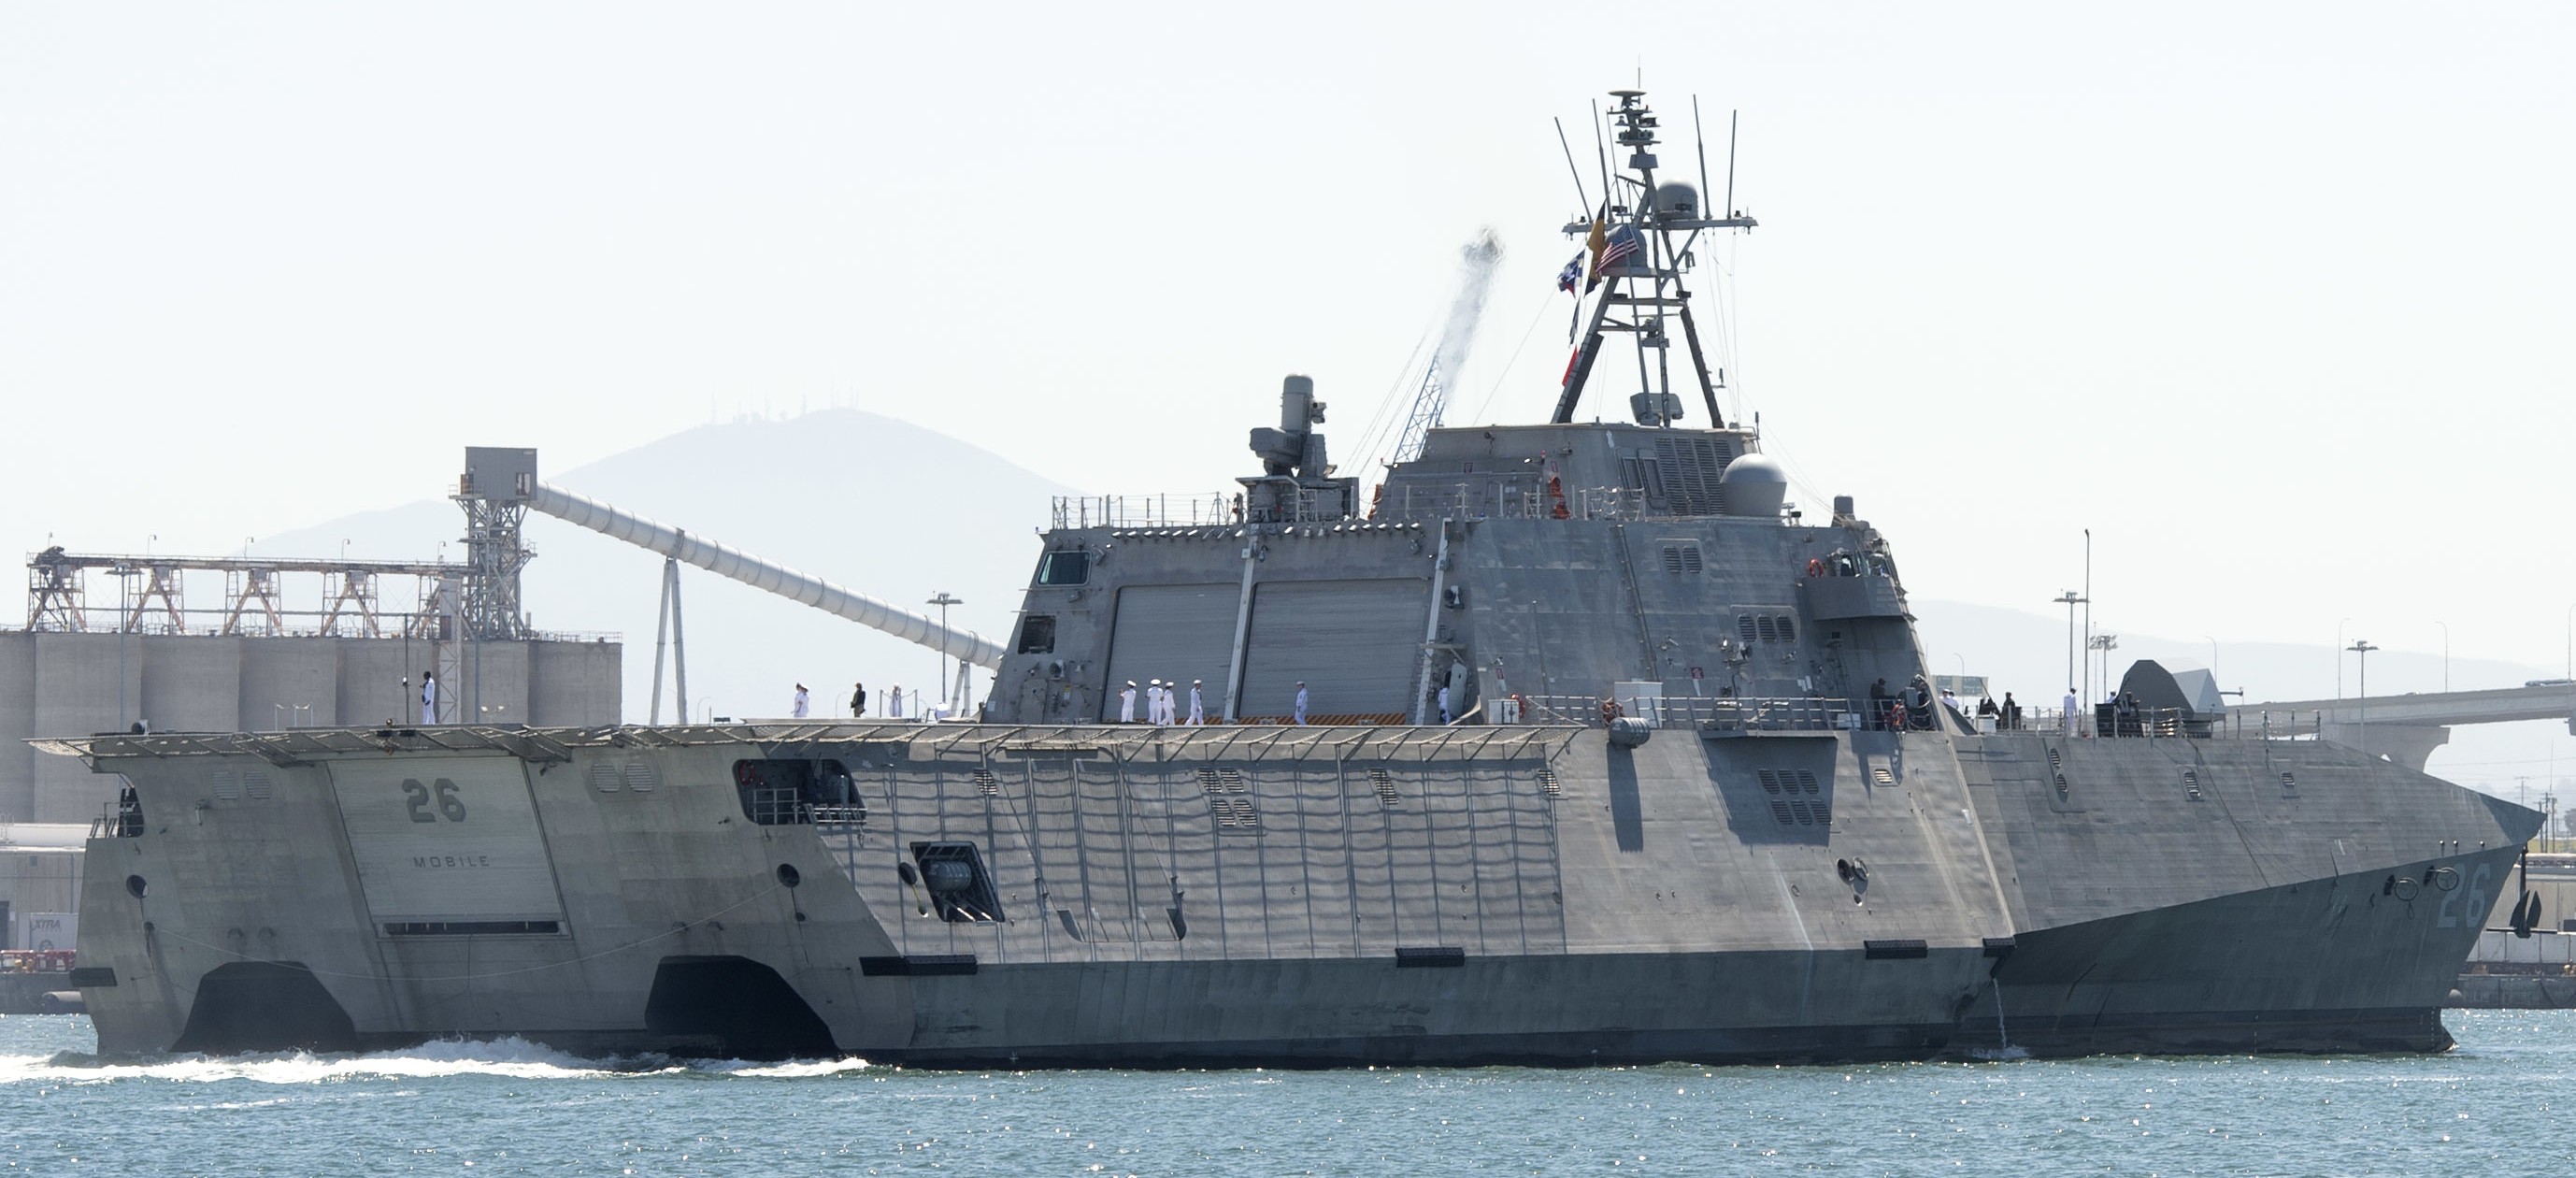 lcs-26 uss mobile independence class littoral combat ship us navy san diego california 11